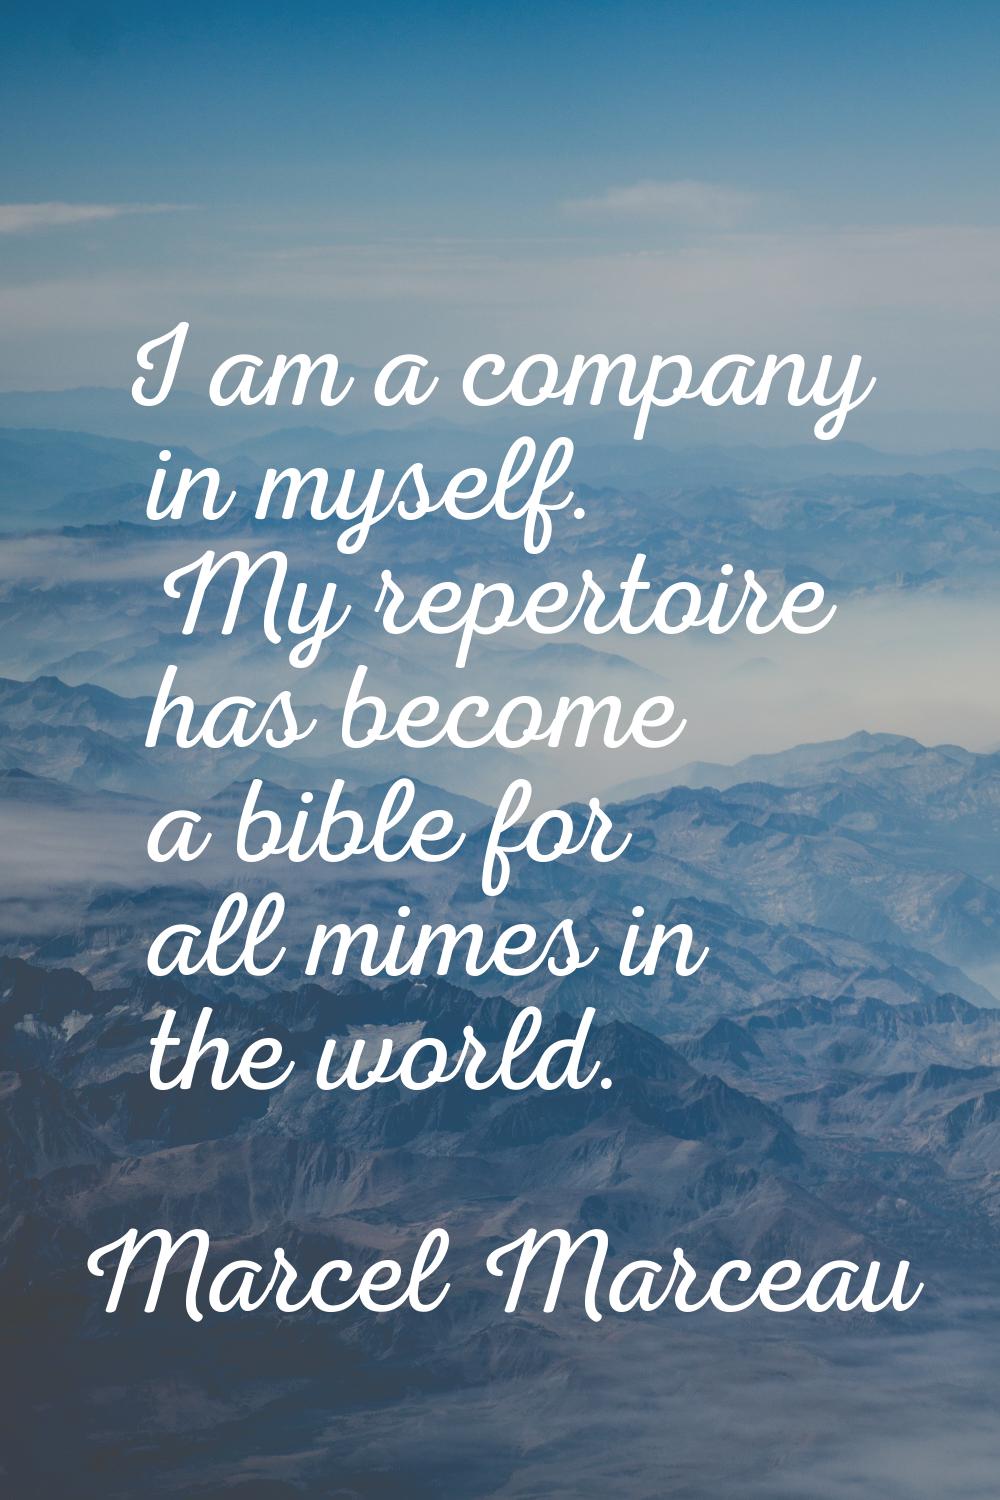 I am a company in myself. My repertoire has become a bible for all mimes in the world.